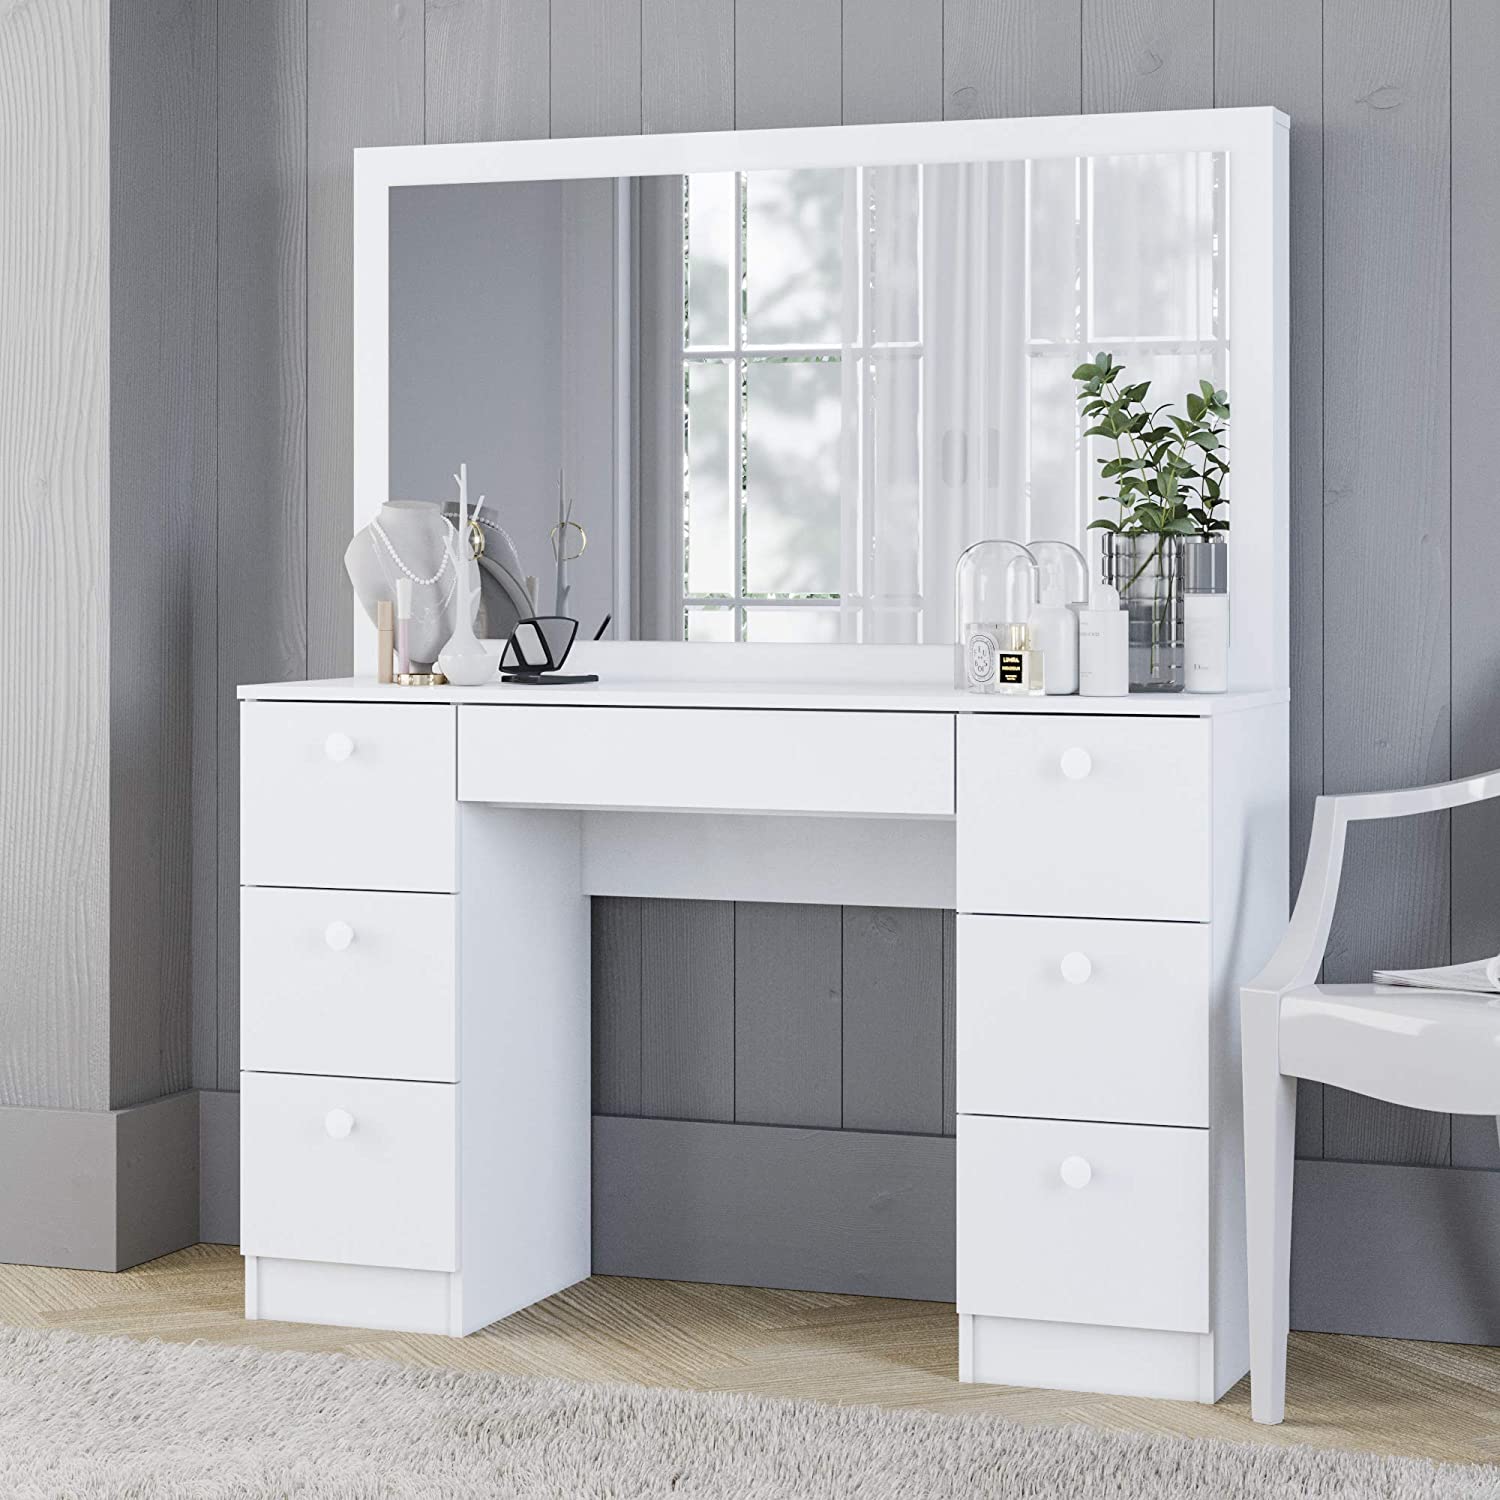 Dressing Tables: Buy Wooden Dressing Table Online in India At Best Price  [100+ Design] | Dressing table design, Dressing table mirror design, Modern dressing  table designs